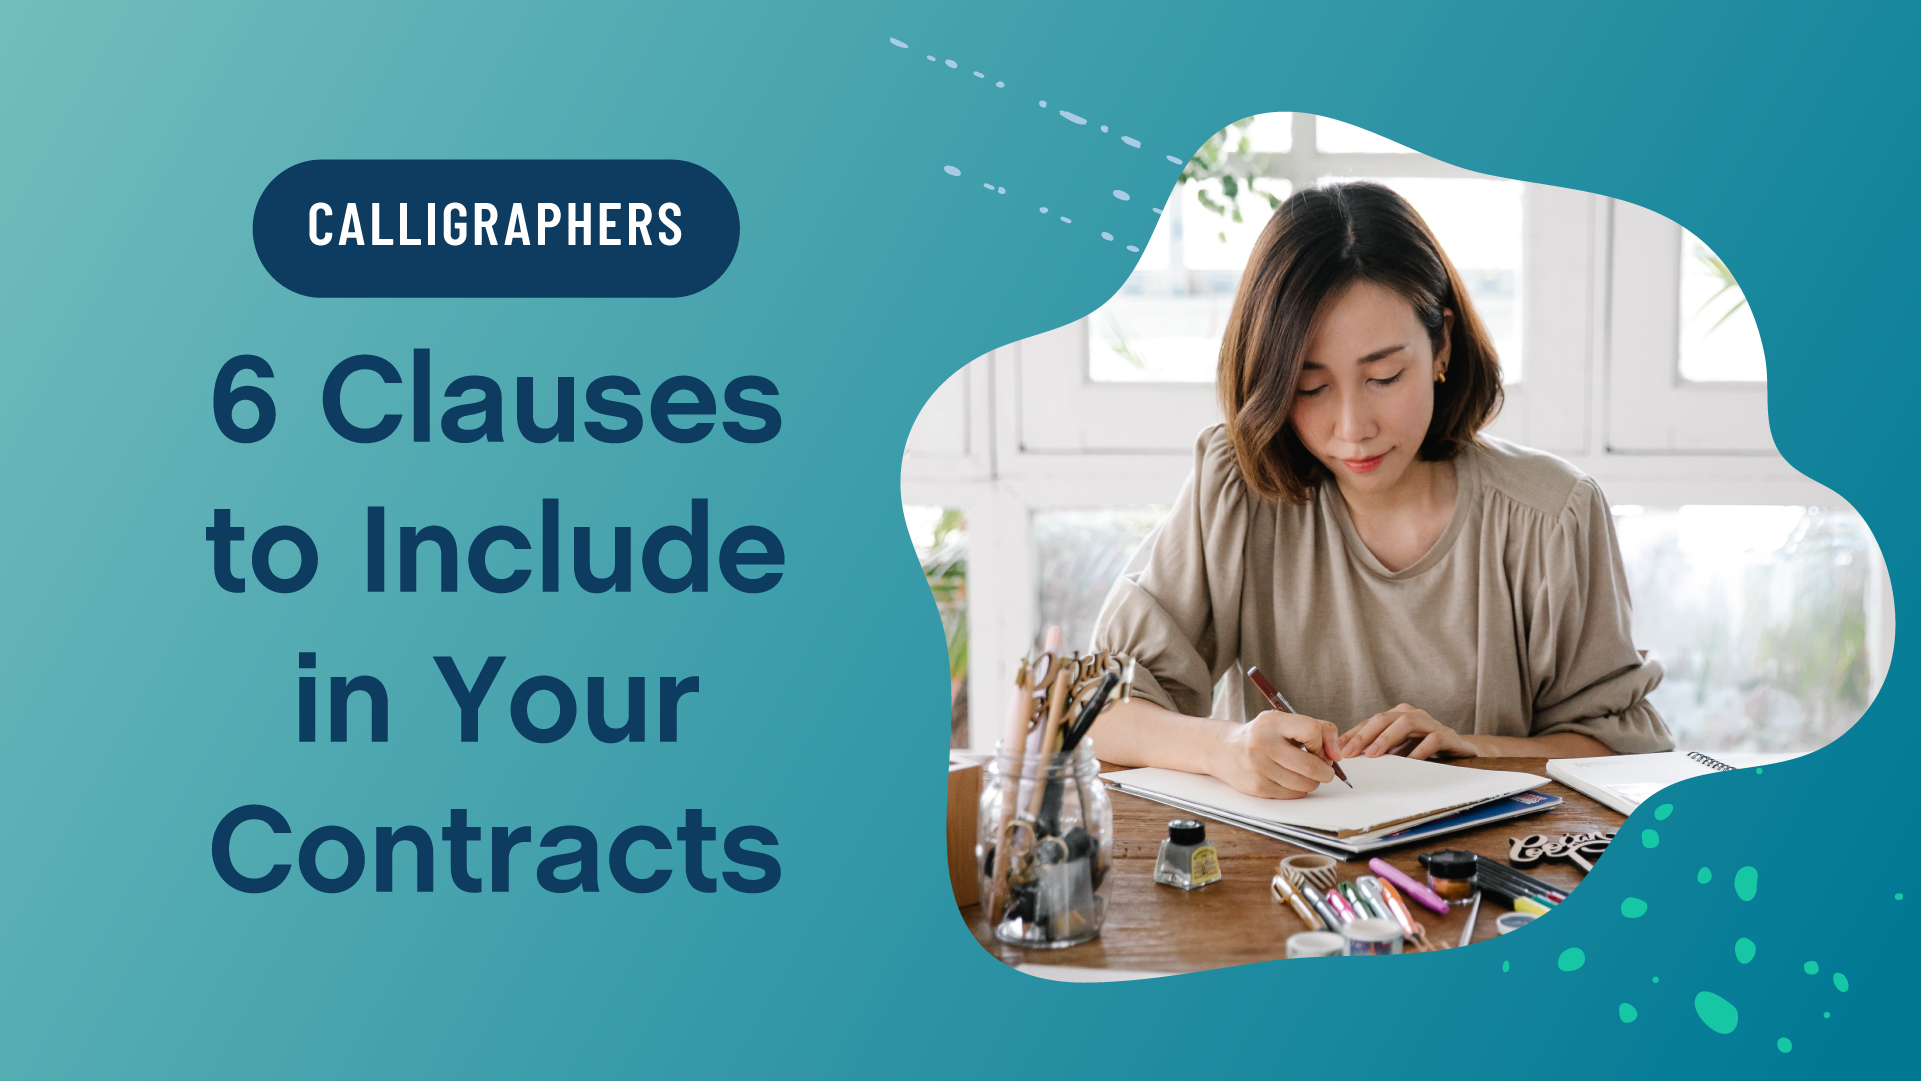 6 Clauses to Include in Your Contracts for Calligraphers